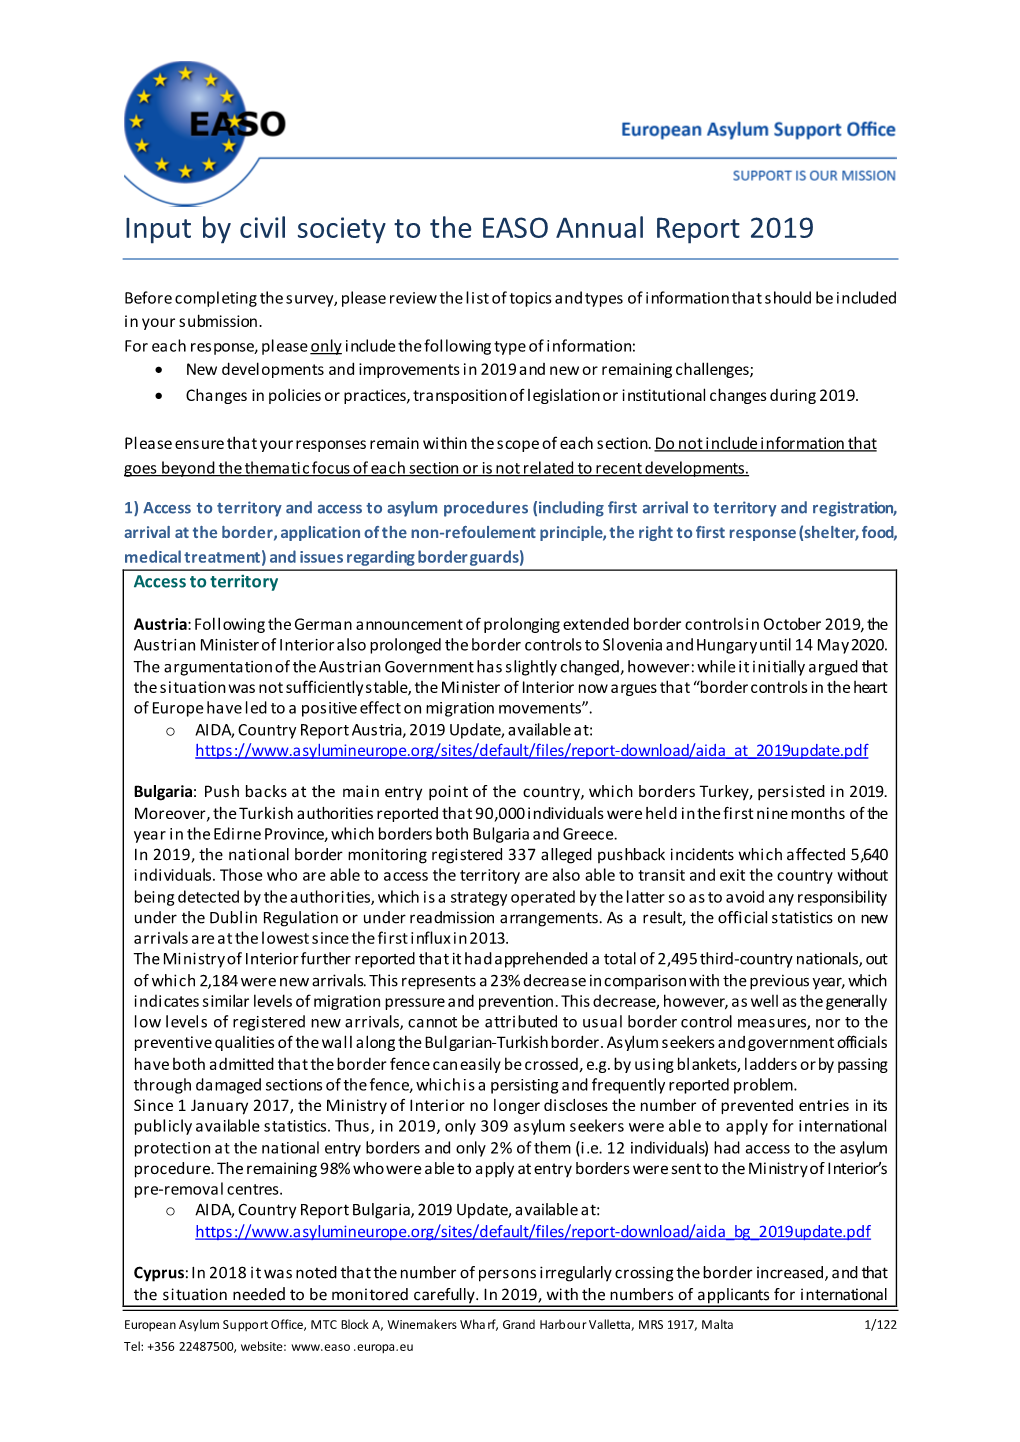 Input by Civil Society to the EASO Annual Report 2019